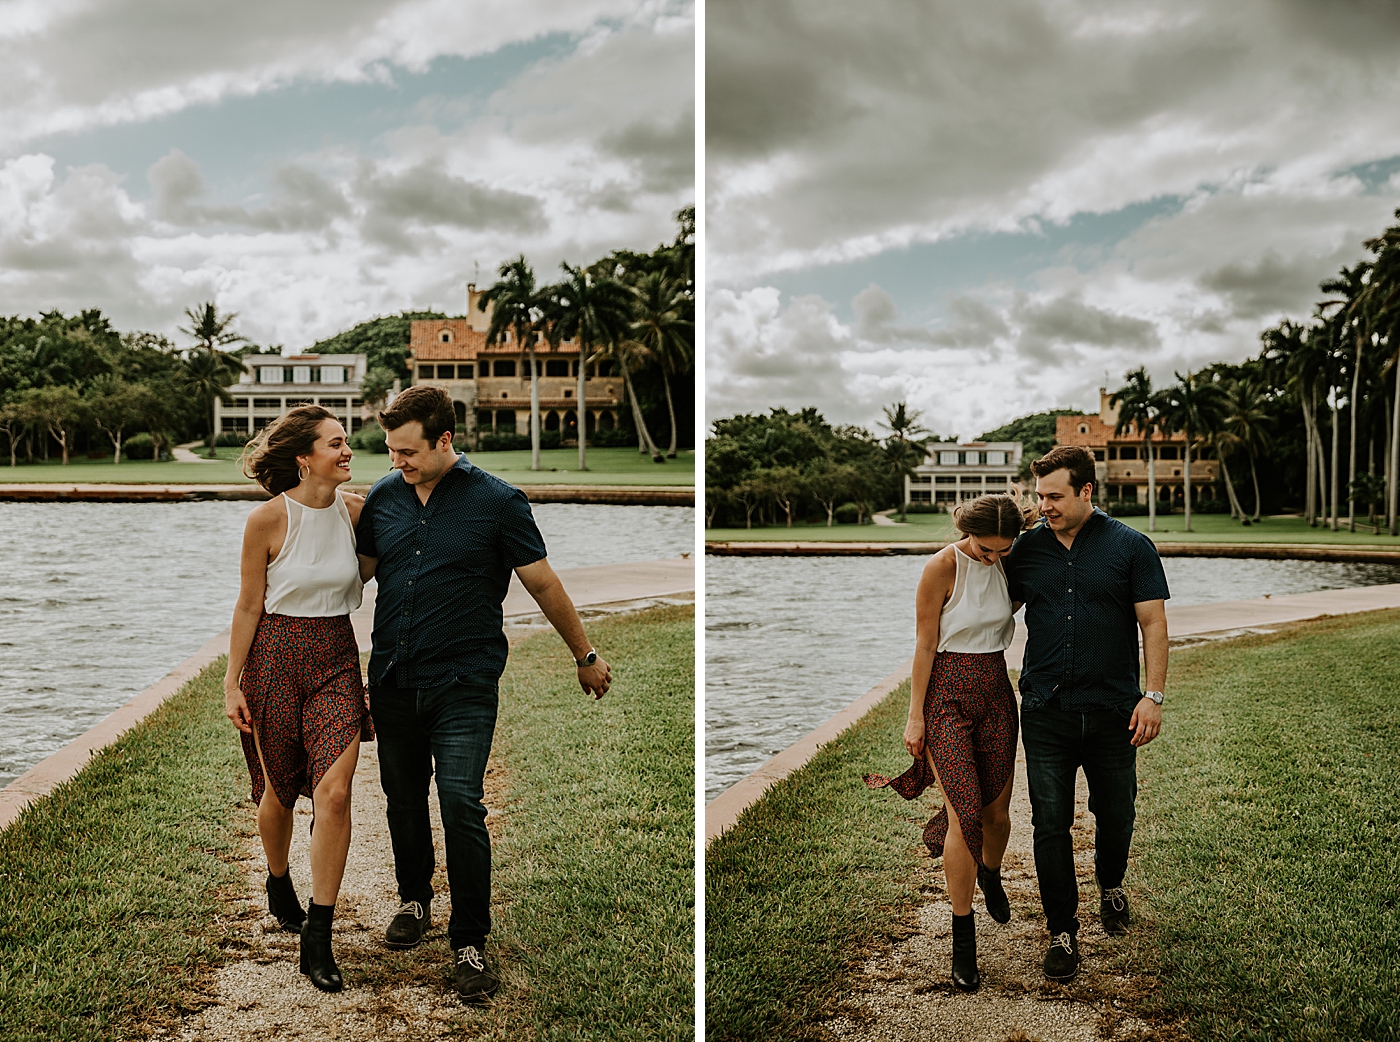 Couple with their arms around each other and walking together by the water Deering Estate Engagement Photography captured by Maggie Alvarez Photography